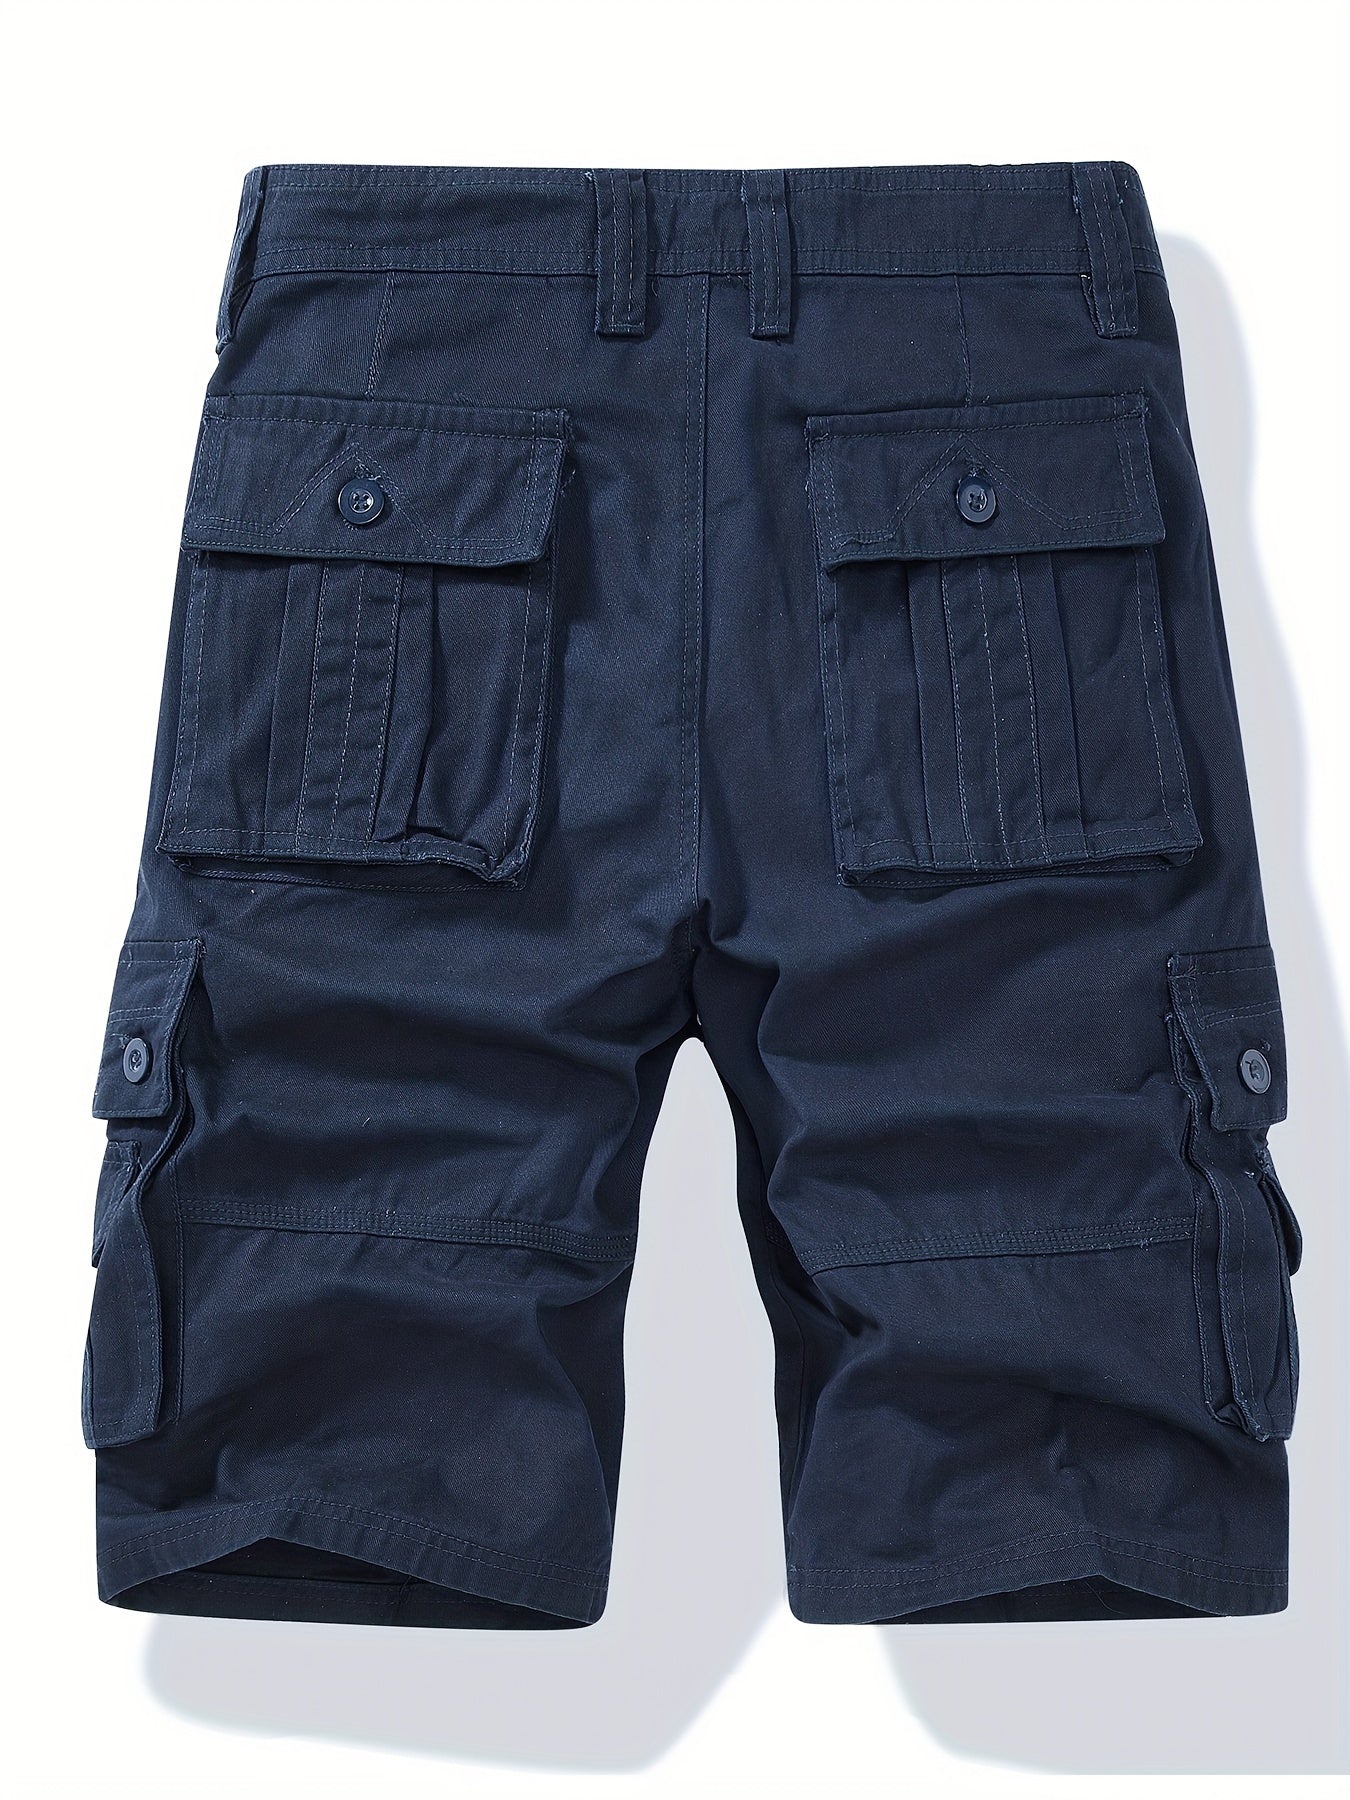 「lovevop」Spring And Summer, Men's Cargo Shorts, Pure Cotton, Casual Beach Pants, Breathable And Multipockets Without Belt